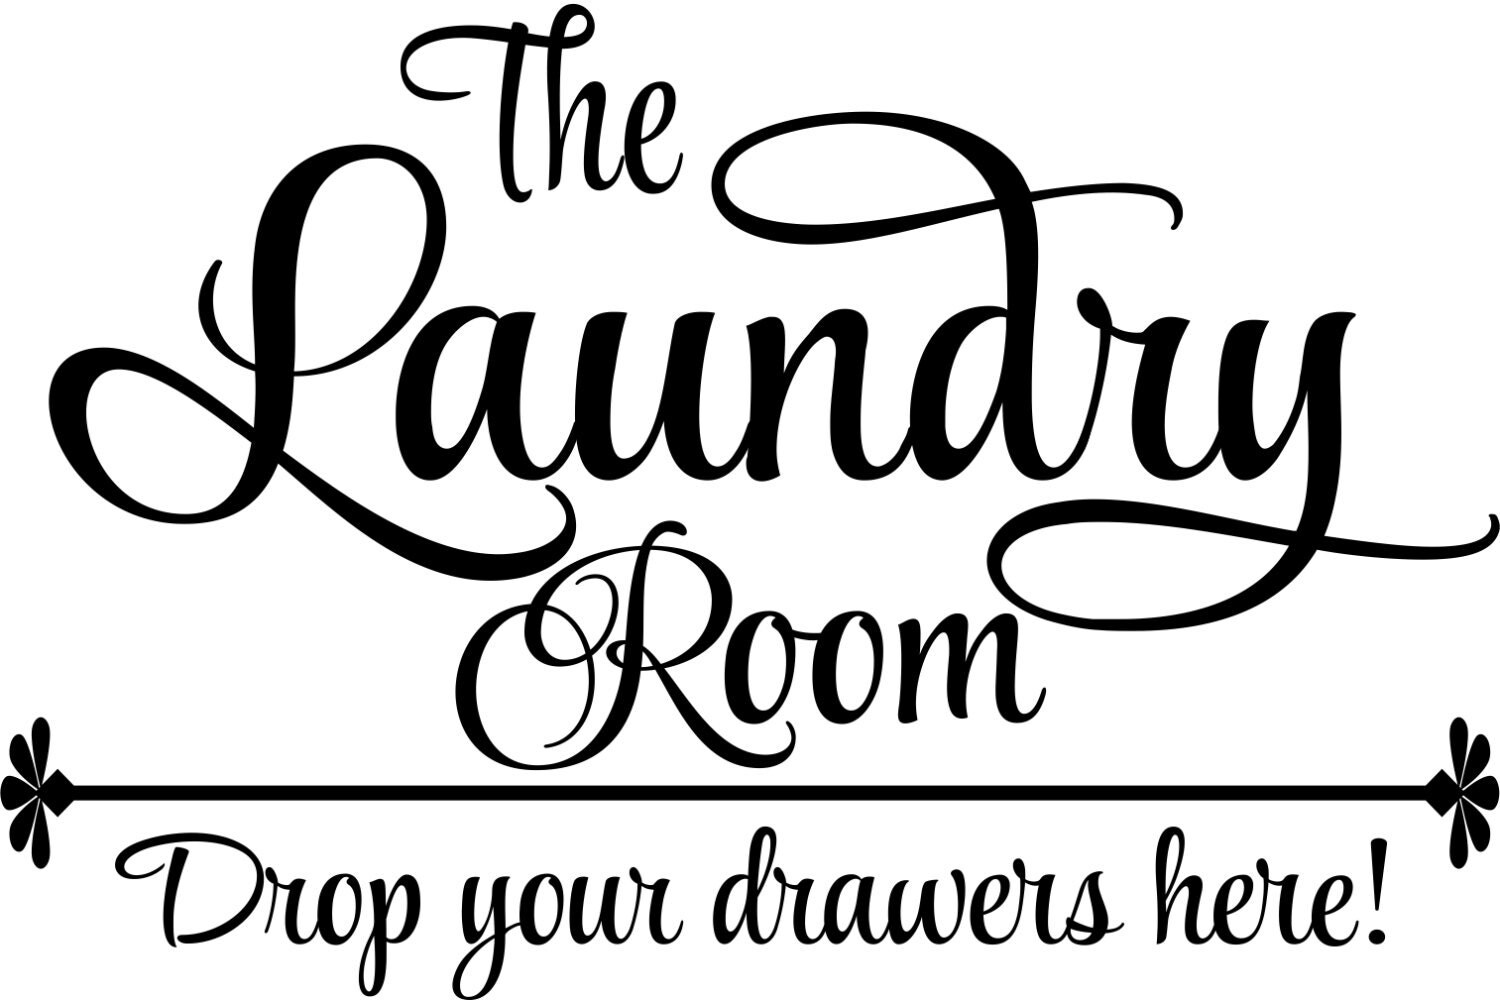 Laundry Room Clipart Black And White : Free Clothesline Cliparts